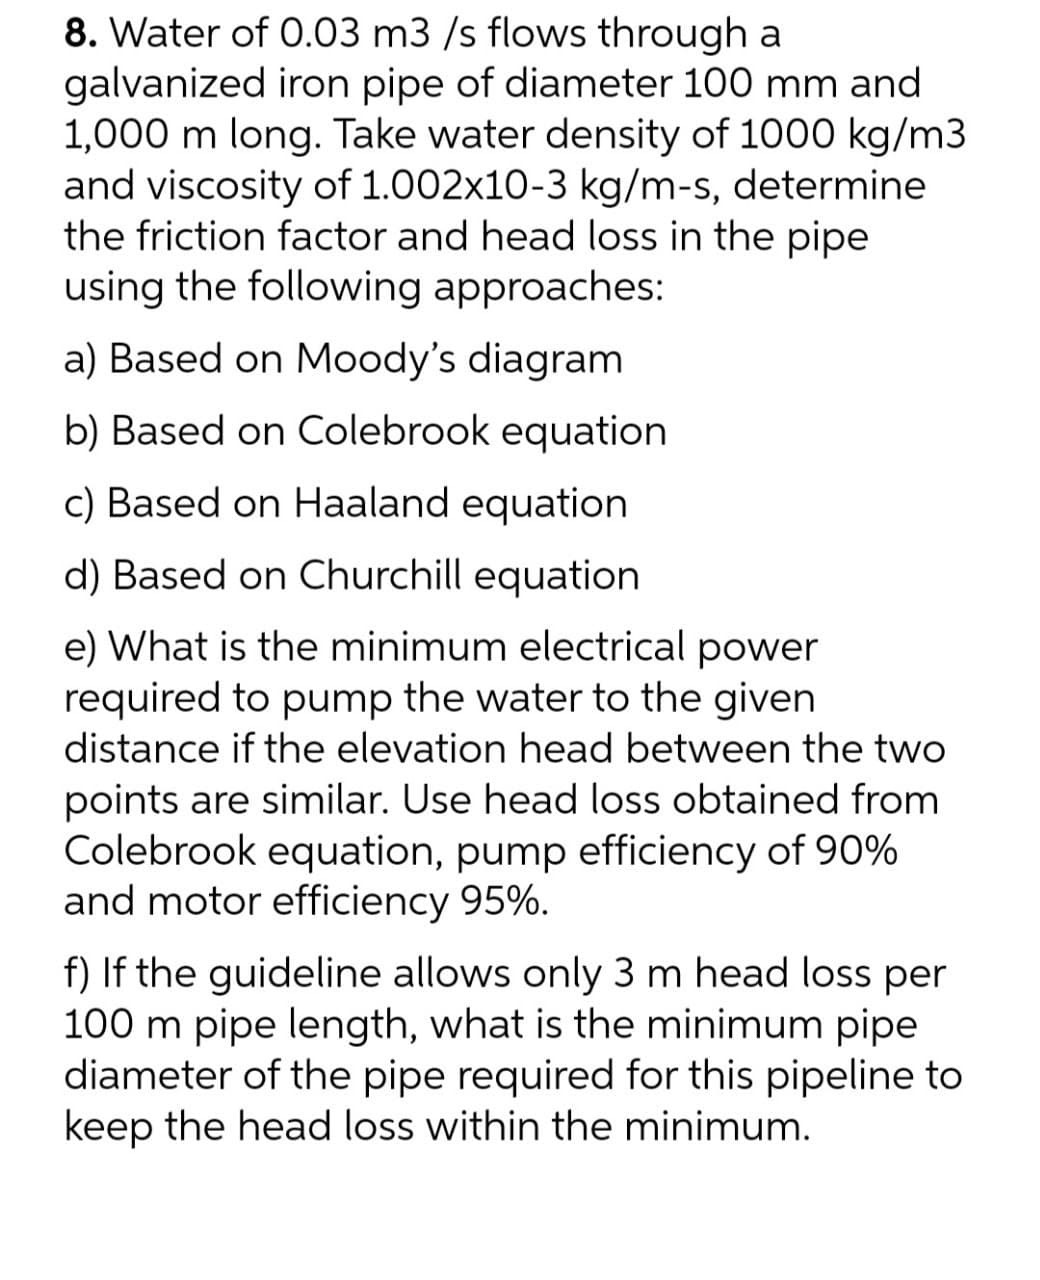 8. Water of 0.03 m3 /s flows through a
galvanized iron pipe of diameter 100 mm and
1,000 m long. Take water density of 1000 kg/m3
and viscosity of 1.002x10-3 kg/m-s, determine
the friction factor and head loss in the pipe
using the following approaches:
a) Based on Moody's diagram
b) Based on Colebrook equation
c) Based on Haaland equation
d) Based on Churchill equation
e) What is the minimum electrical power
required to pump the water to the given
distance if the elevation head between the two
points are similar. Use head loss obtained from
Colebrook equation, pump efficiency of 90%
and motor efficiency 95%.
f) If the guideline allows only 3 m head loss per
100 m pipe length, what is the minimum pipe
diameter of the pipe required for this pipeline to
keep the head loss within the minimum.
